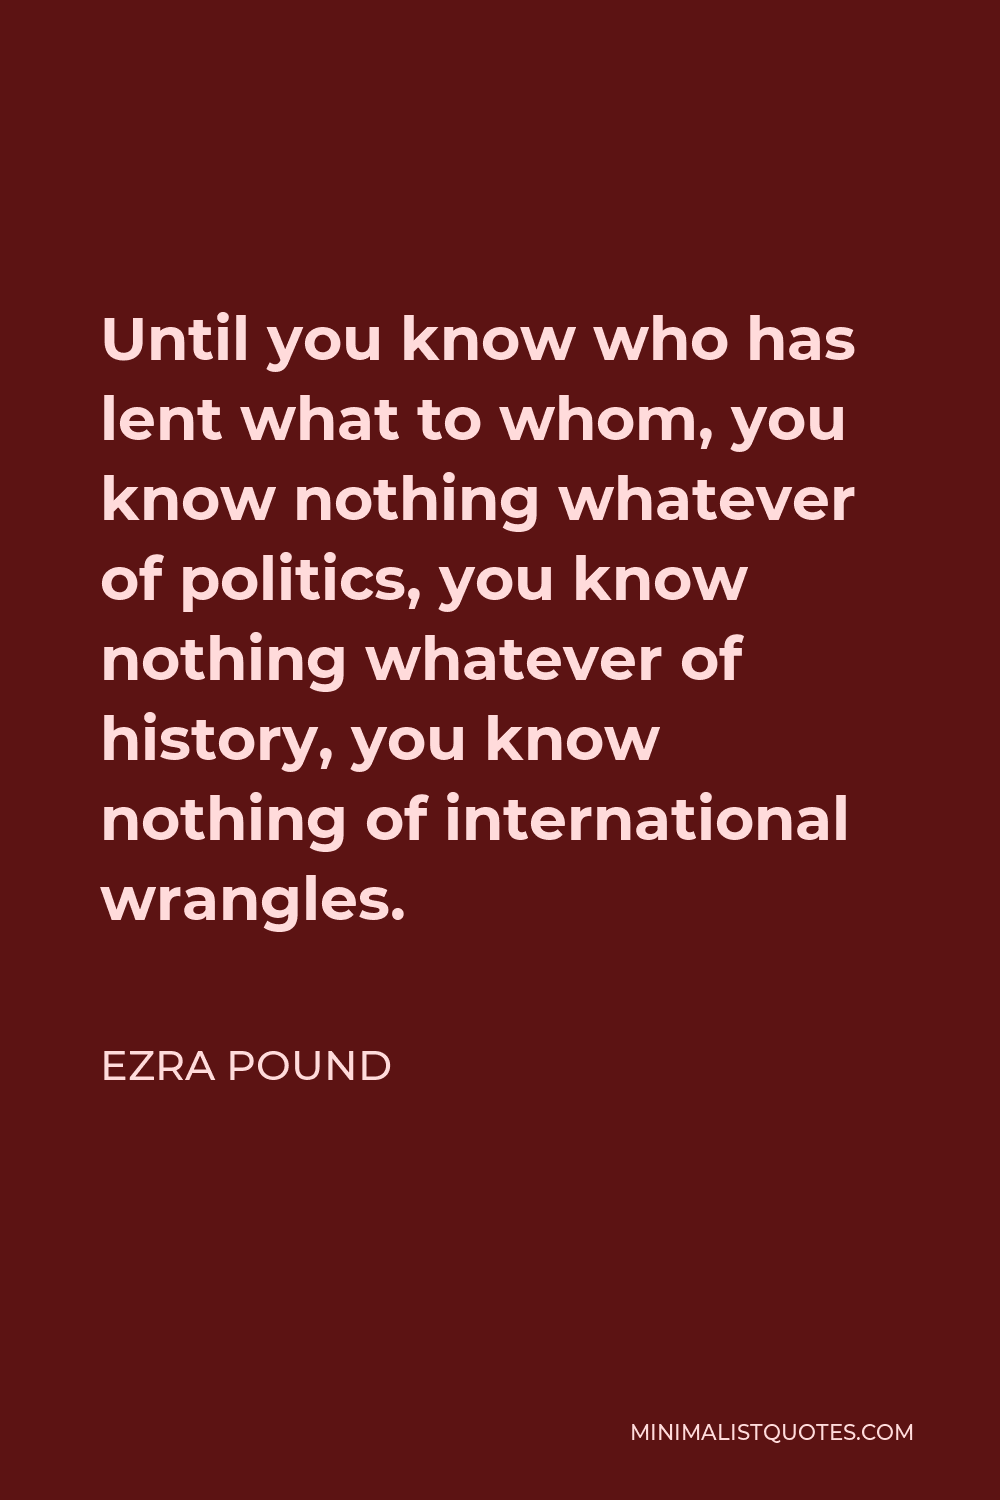 Ezra Pound Quote - Until you know who has lent what to whom, you know nothing whatever of politics, you know nothing whatever of history, you know nothing of international wrangles.